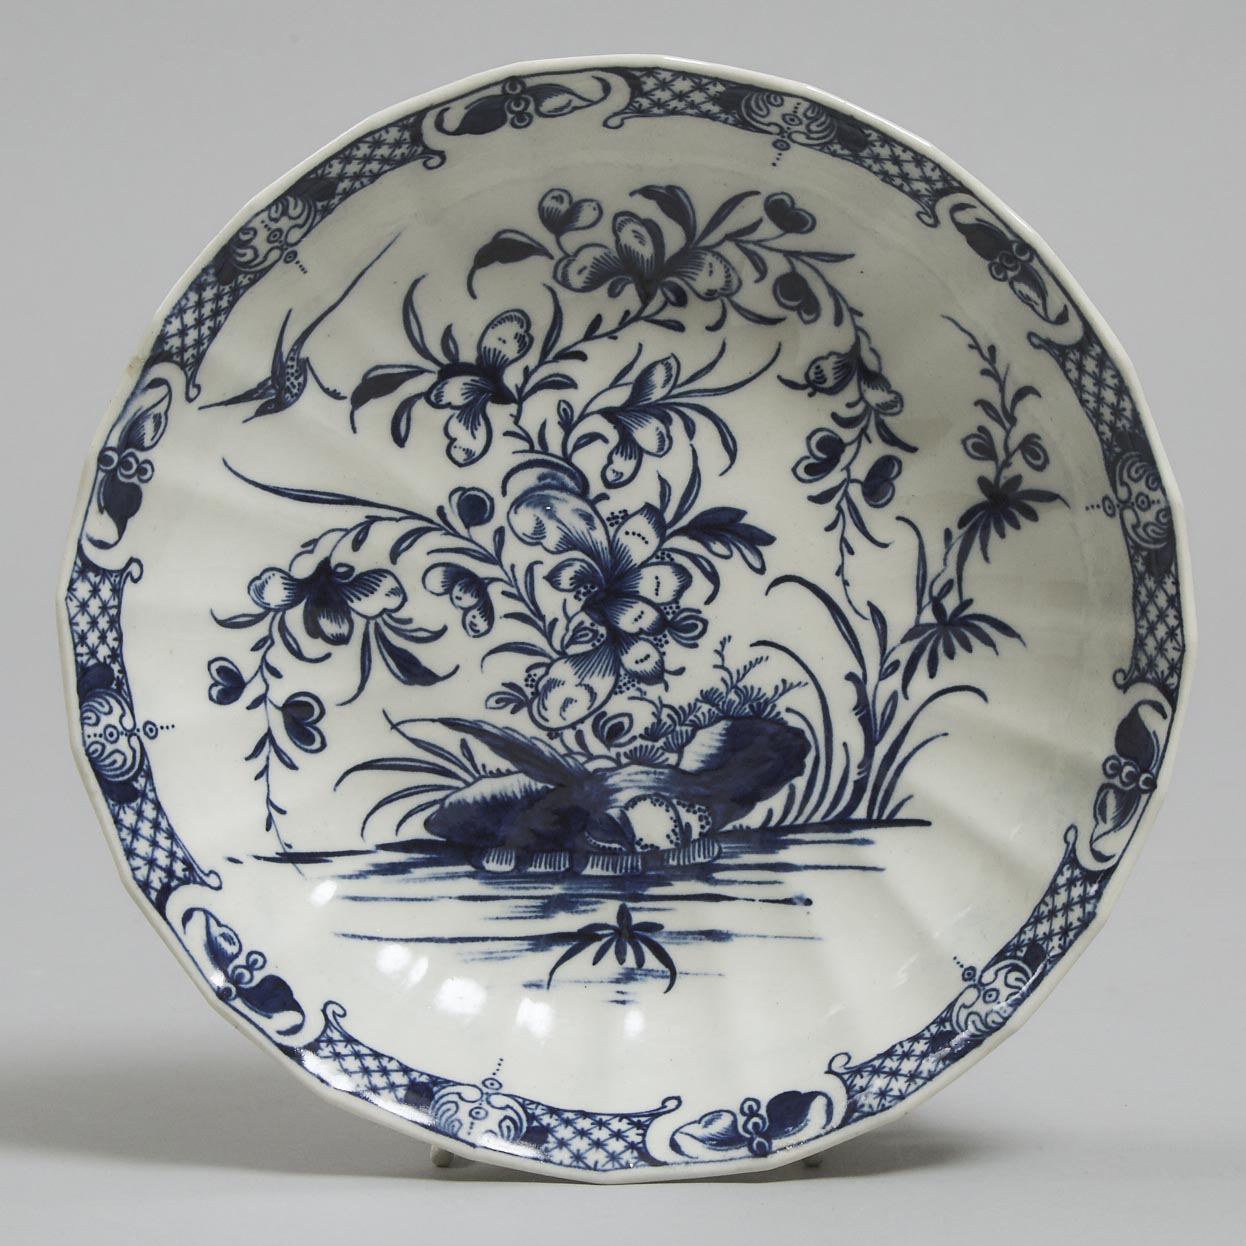 Worcester 'Hollow Rock Lily' Pattern Saucer Dish, c.1770